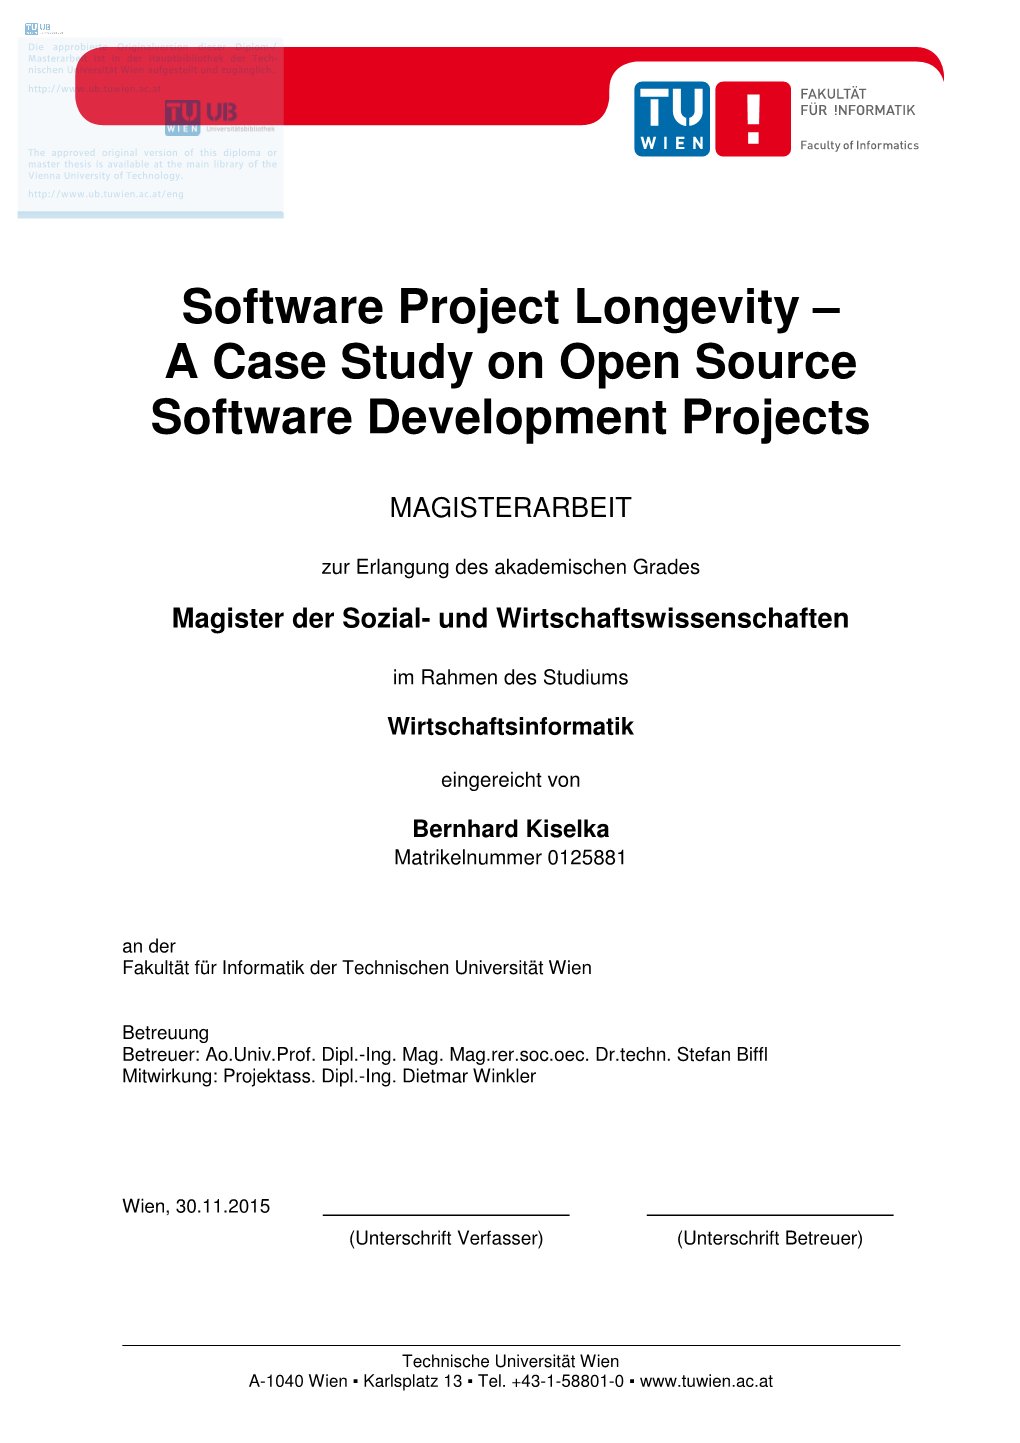 Software Project Longevity – a Case Study on Open Source Software Development Projects